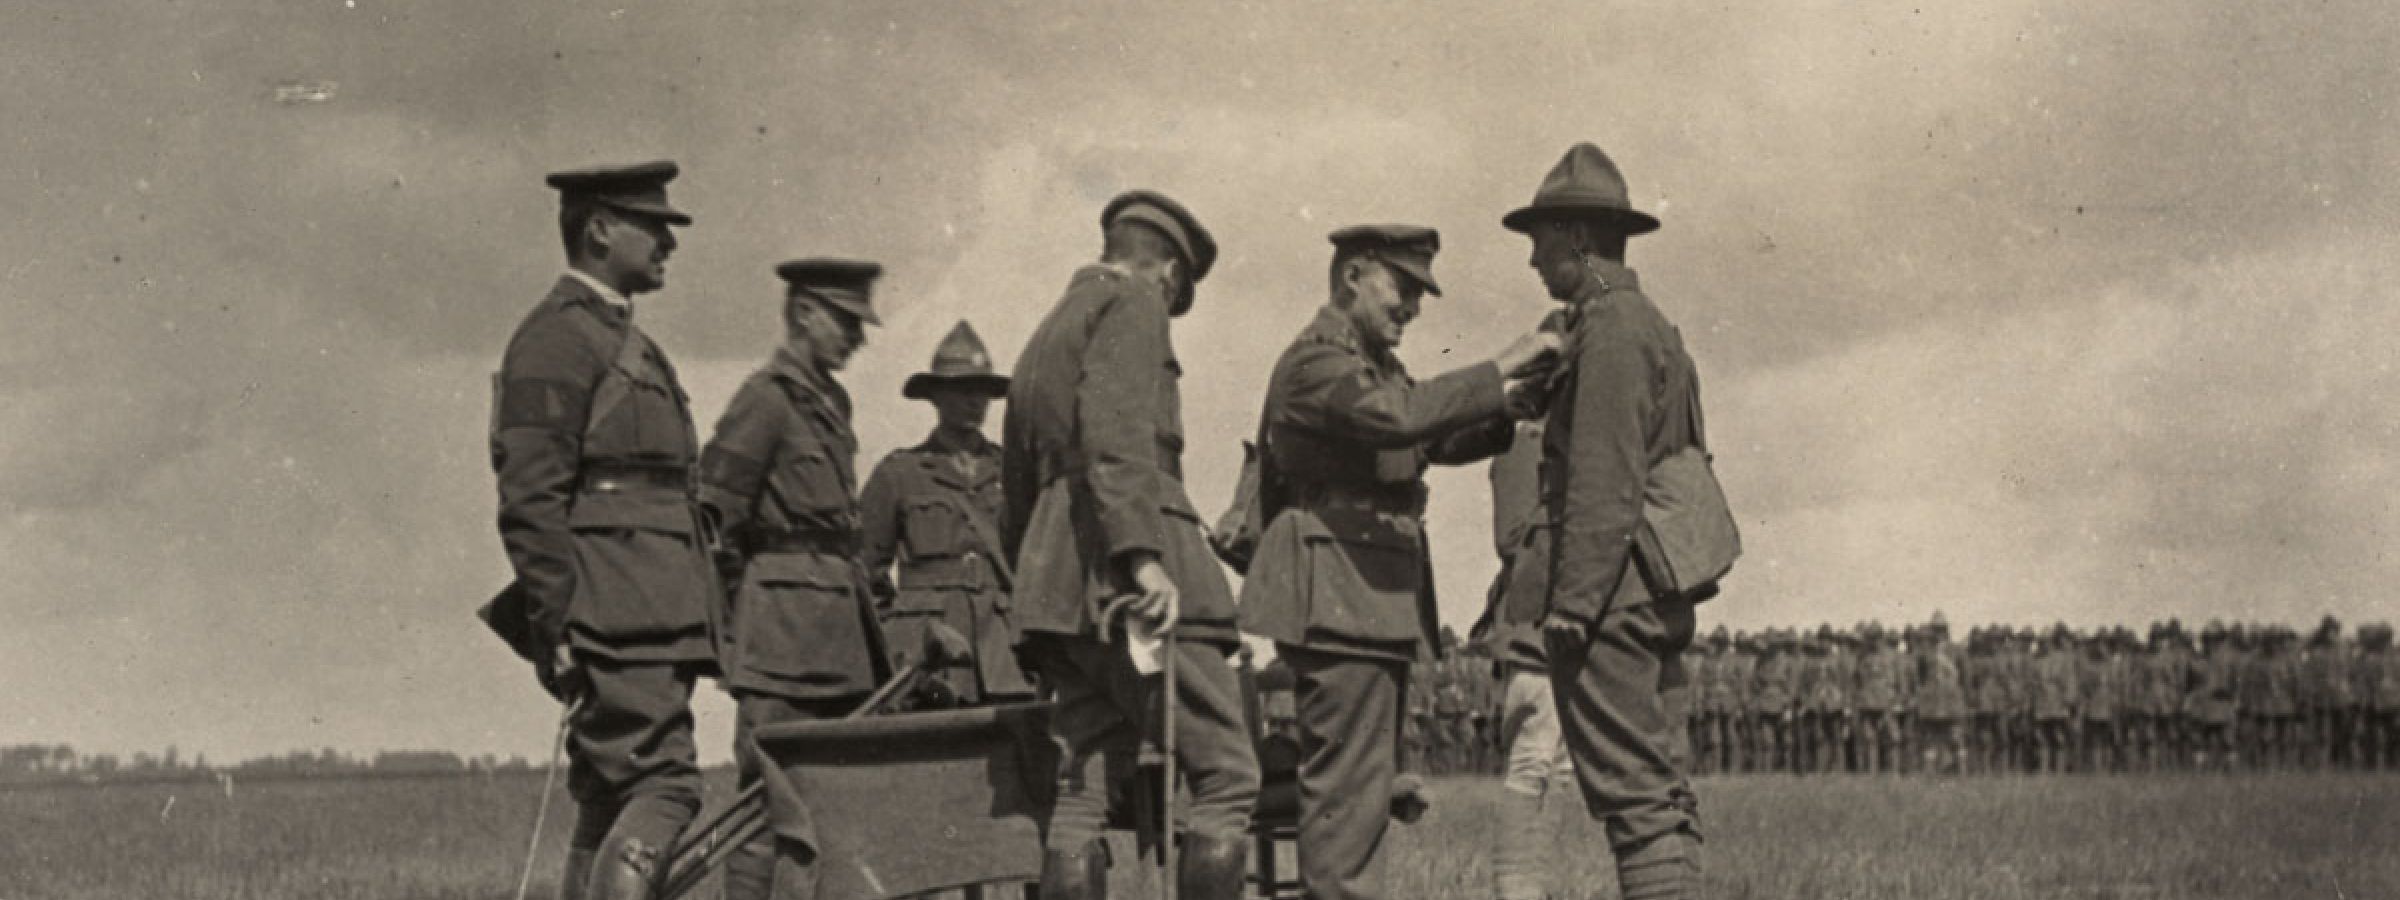 General Russell awards a soldier a medal  for gallantry - earned in the fighting at Meteren, France 1918.